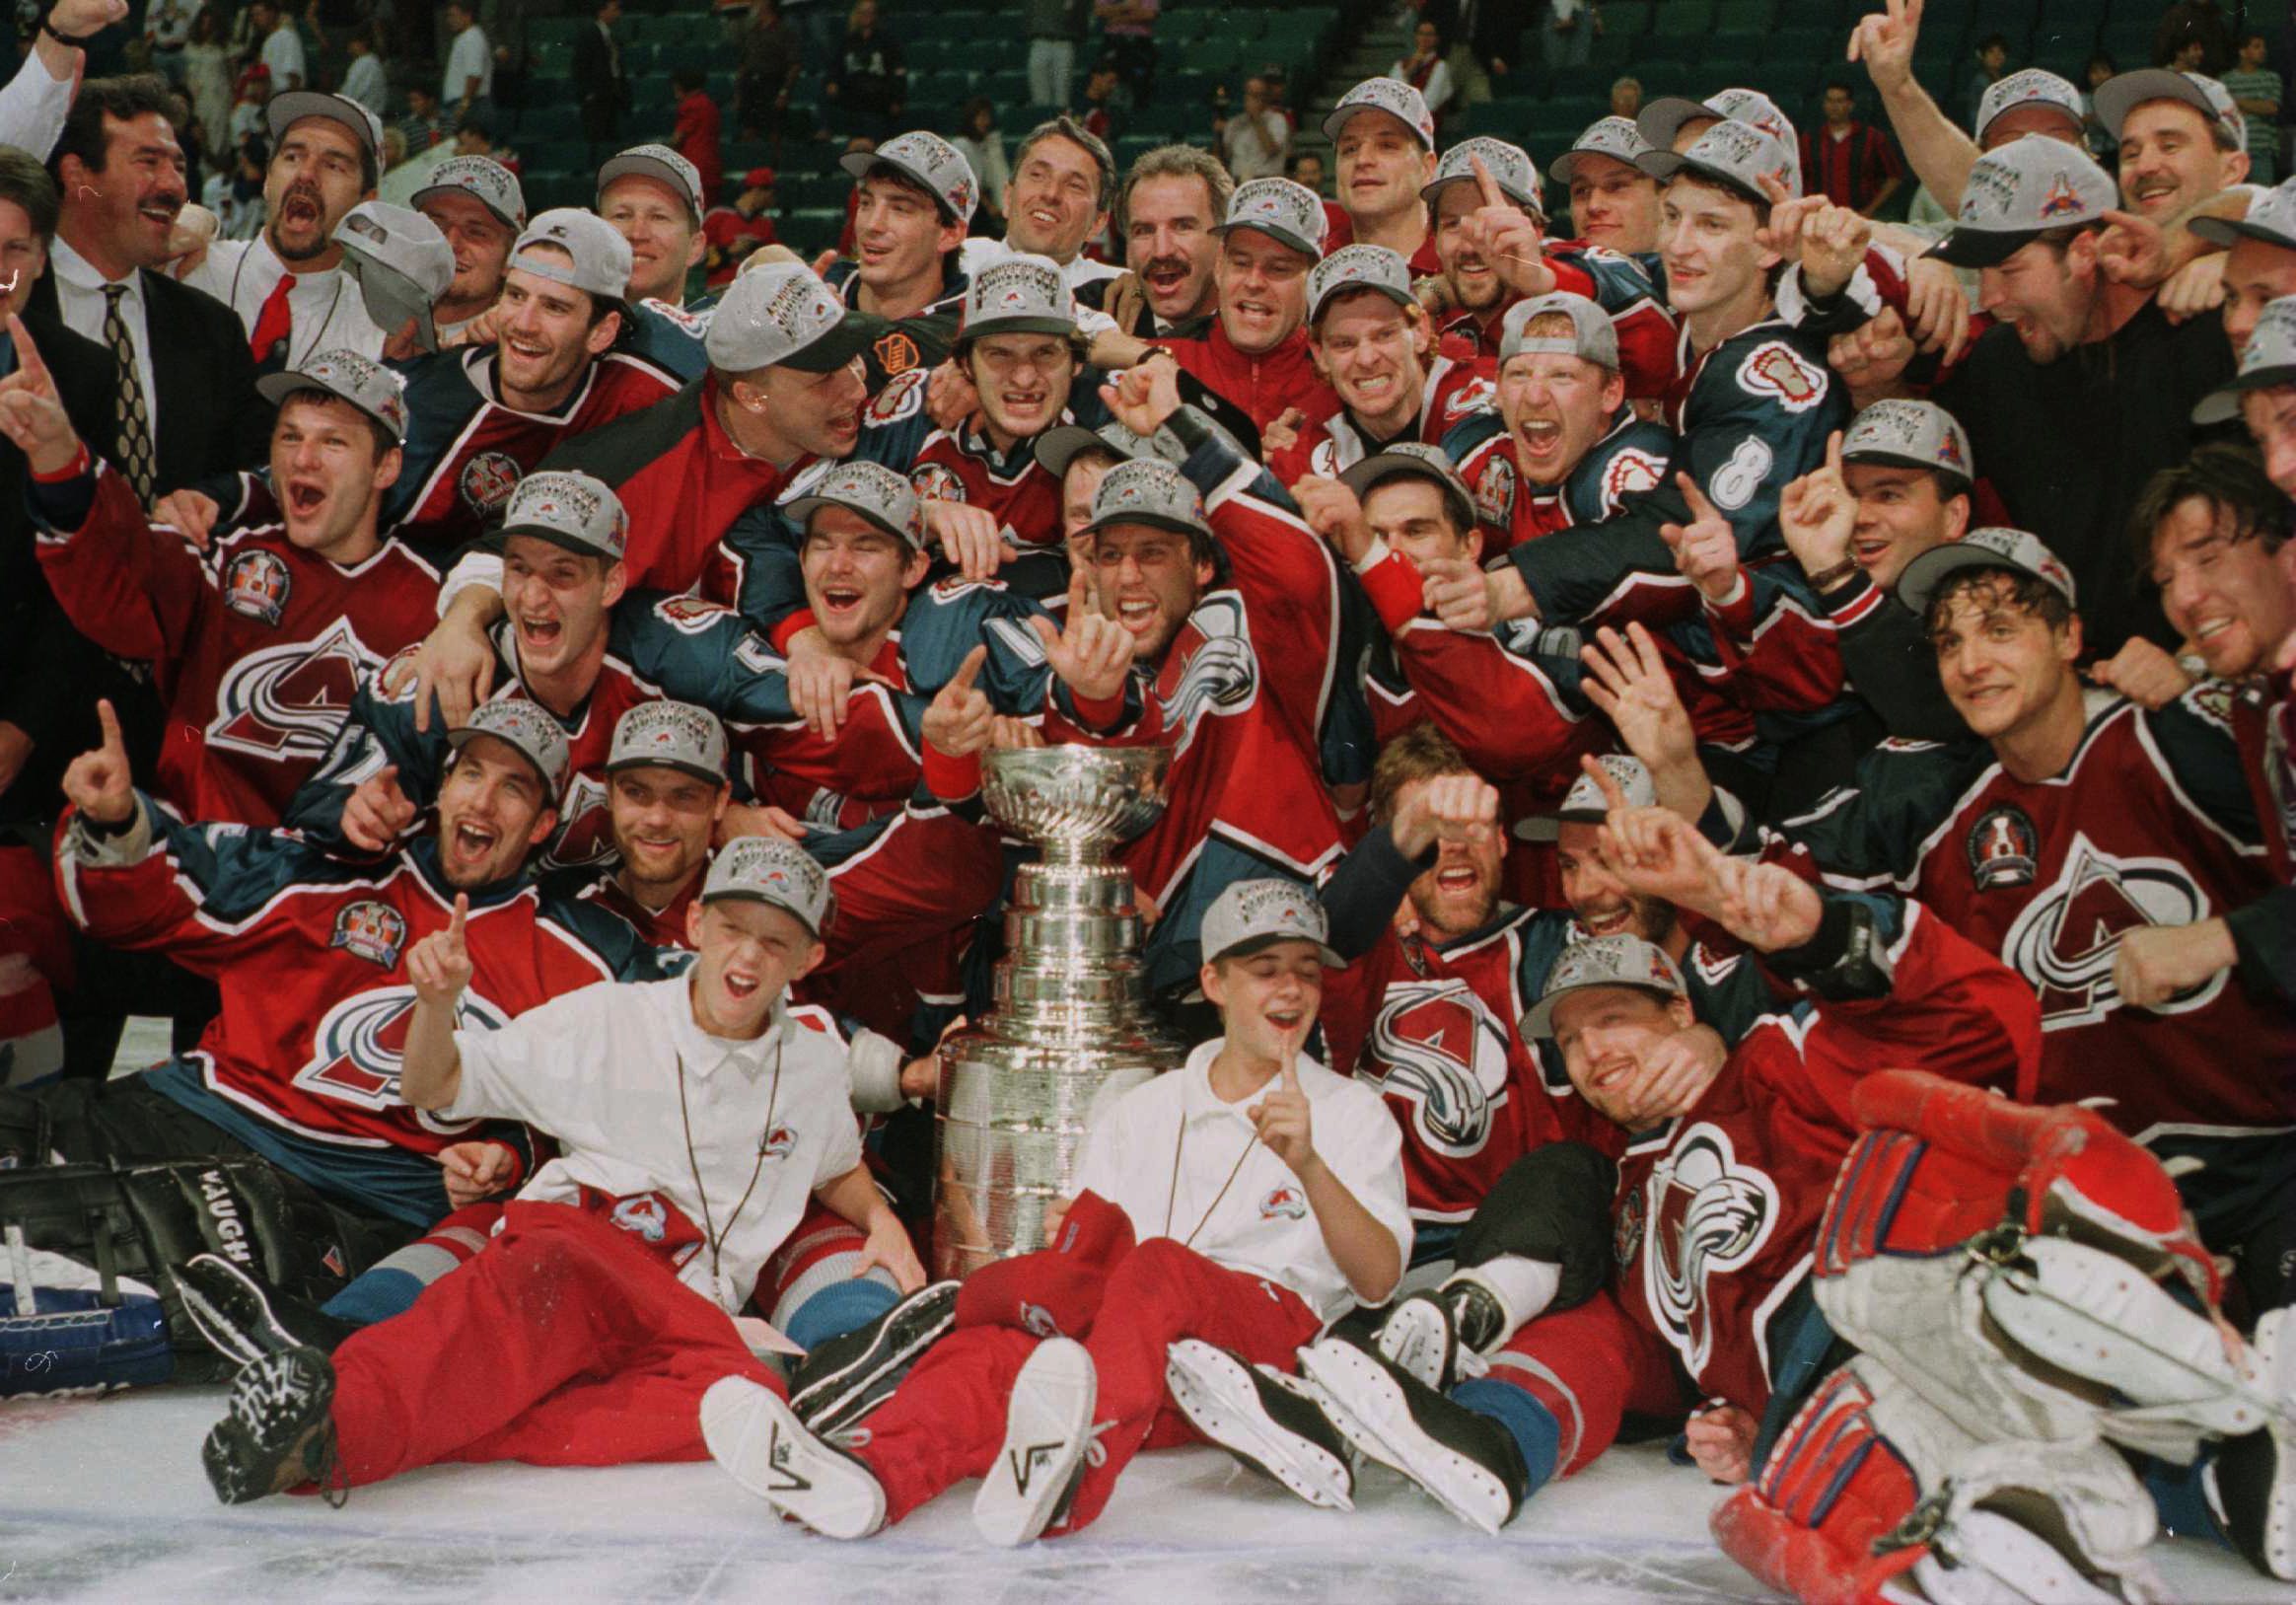 Colorado Avalanche 1995-1996 Stanley Cup Winners' 15 years Reunion at  Denver Pepsi Center, 2010 